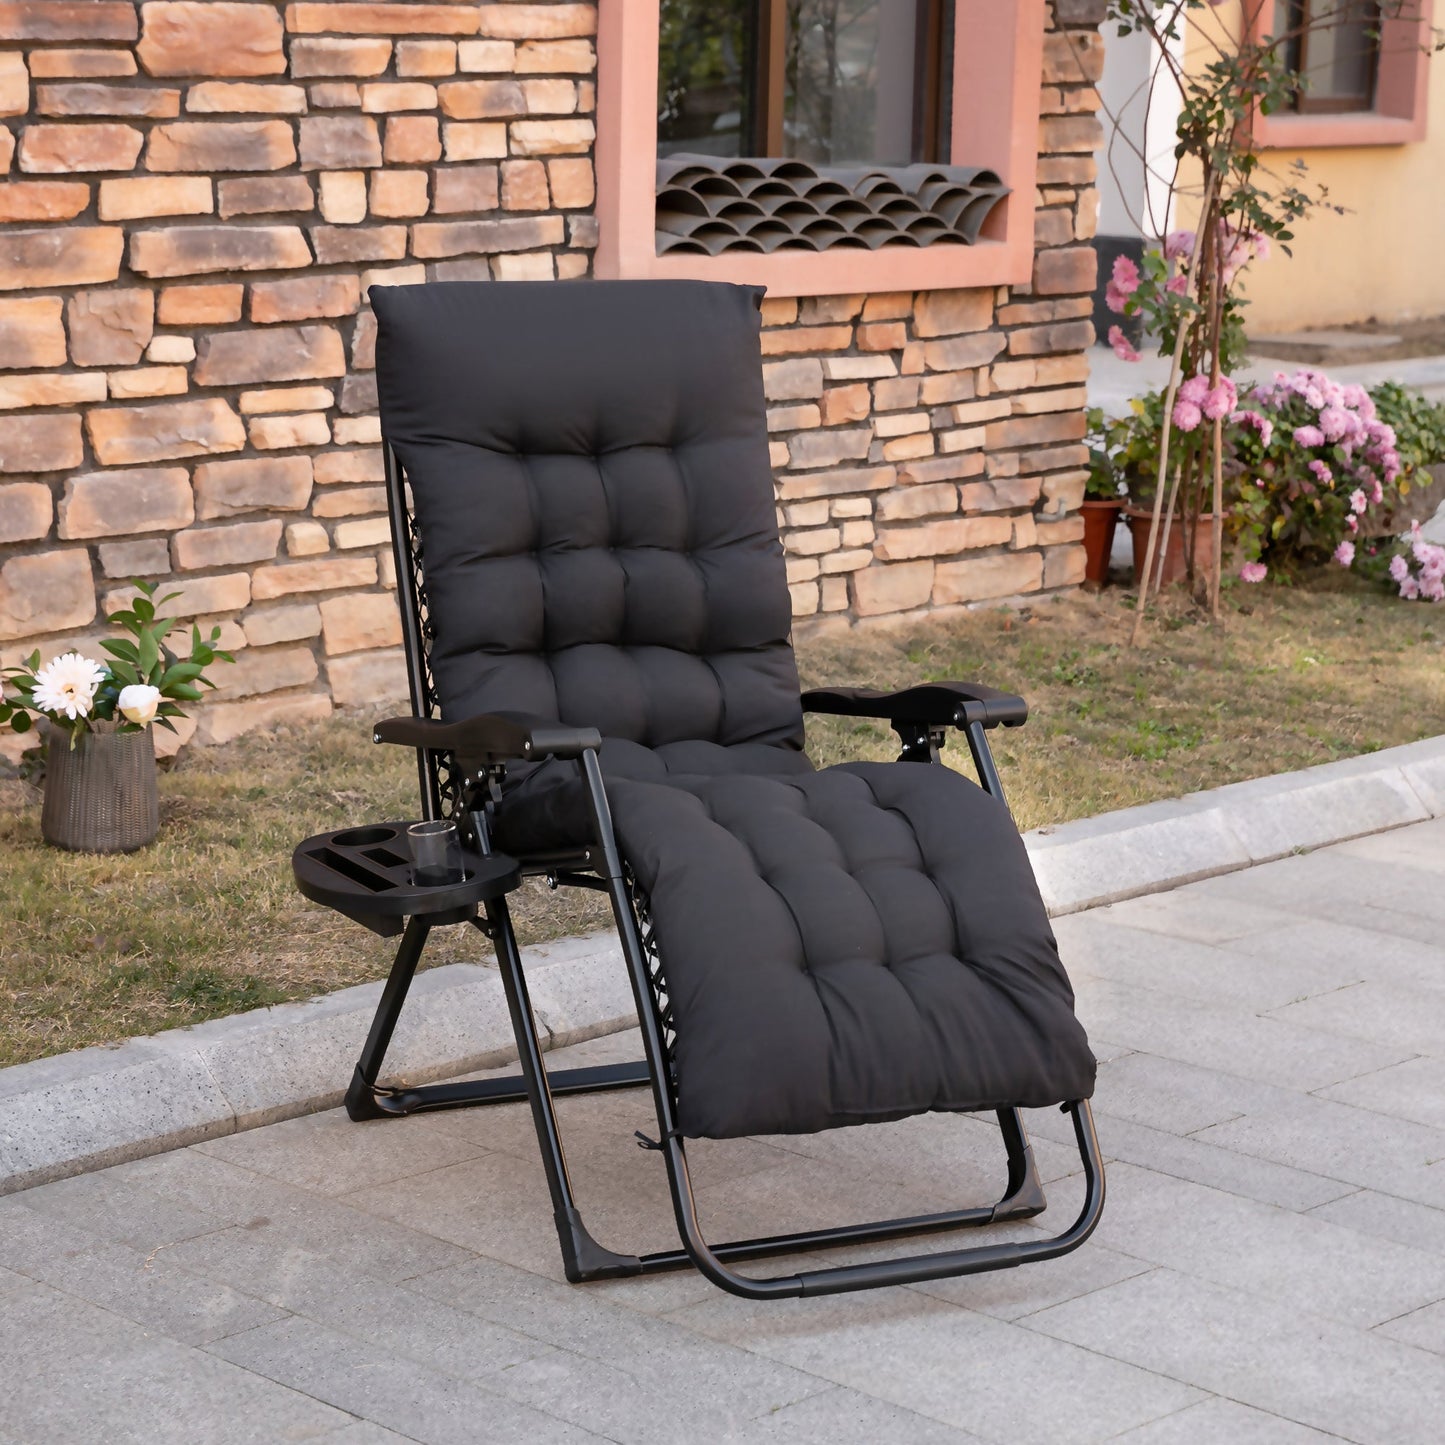 -Outsunny Padded Zero Gravity Chair, Folding Recliner Chair with Cup Holder Cushion, Black - Outdoor Style Company